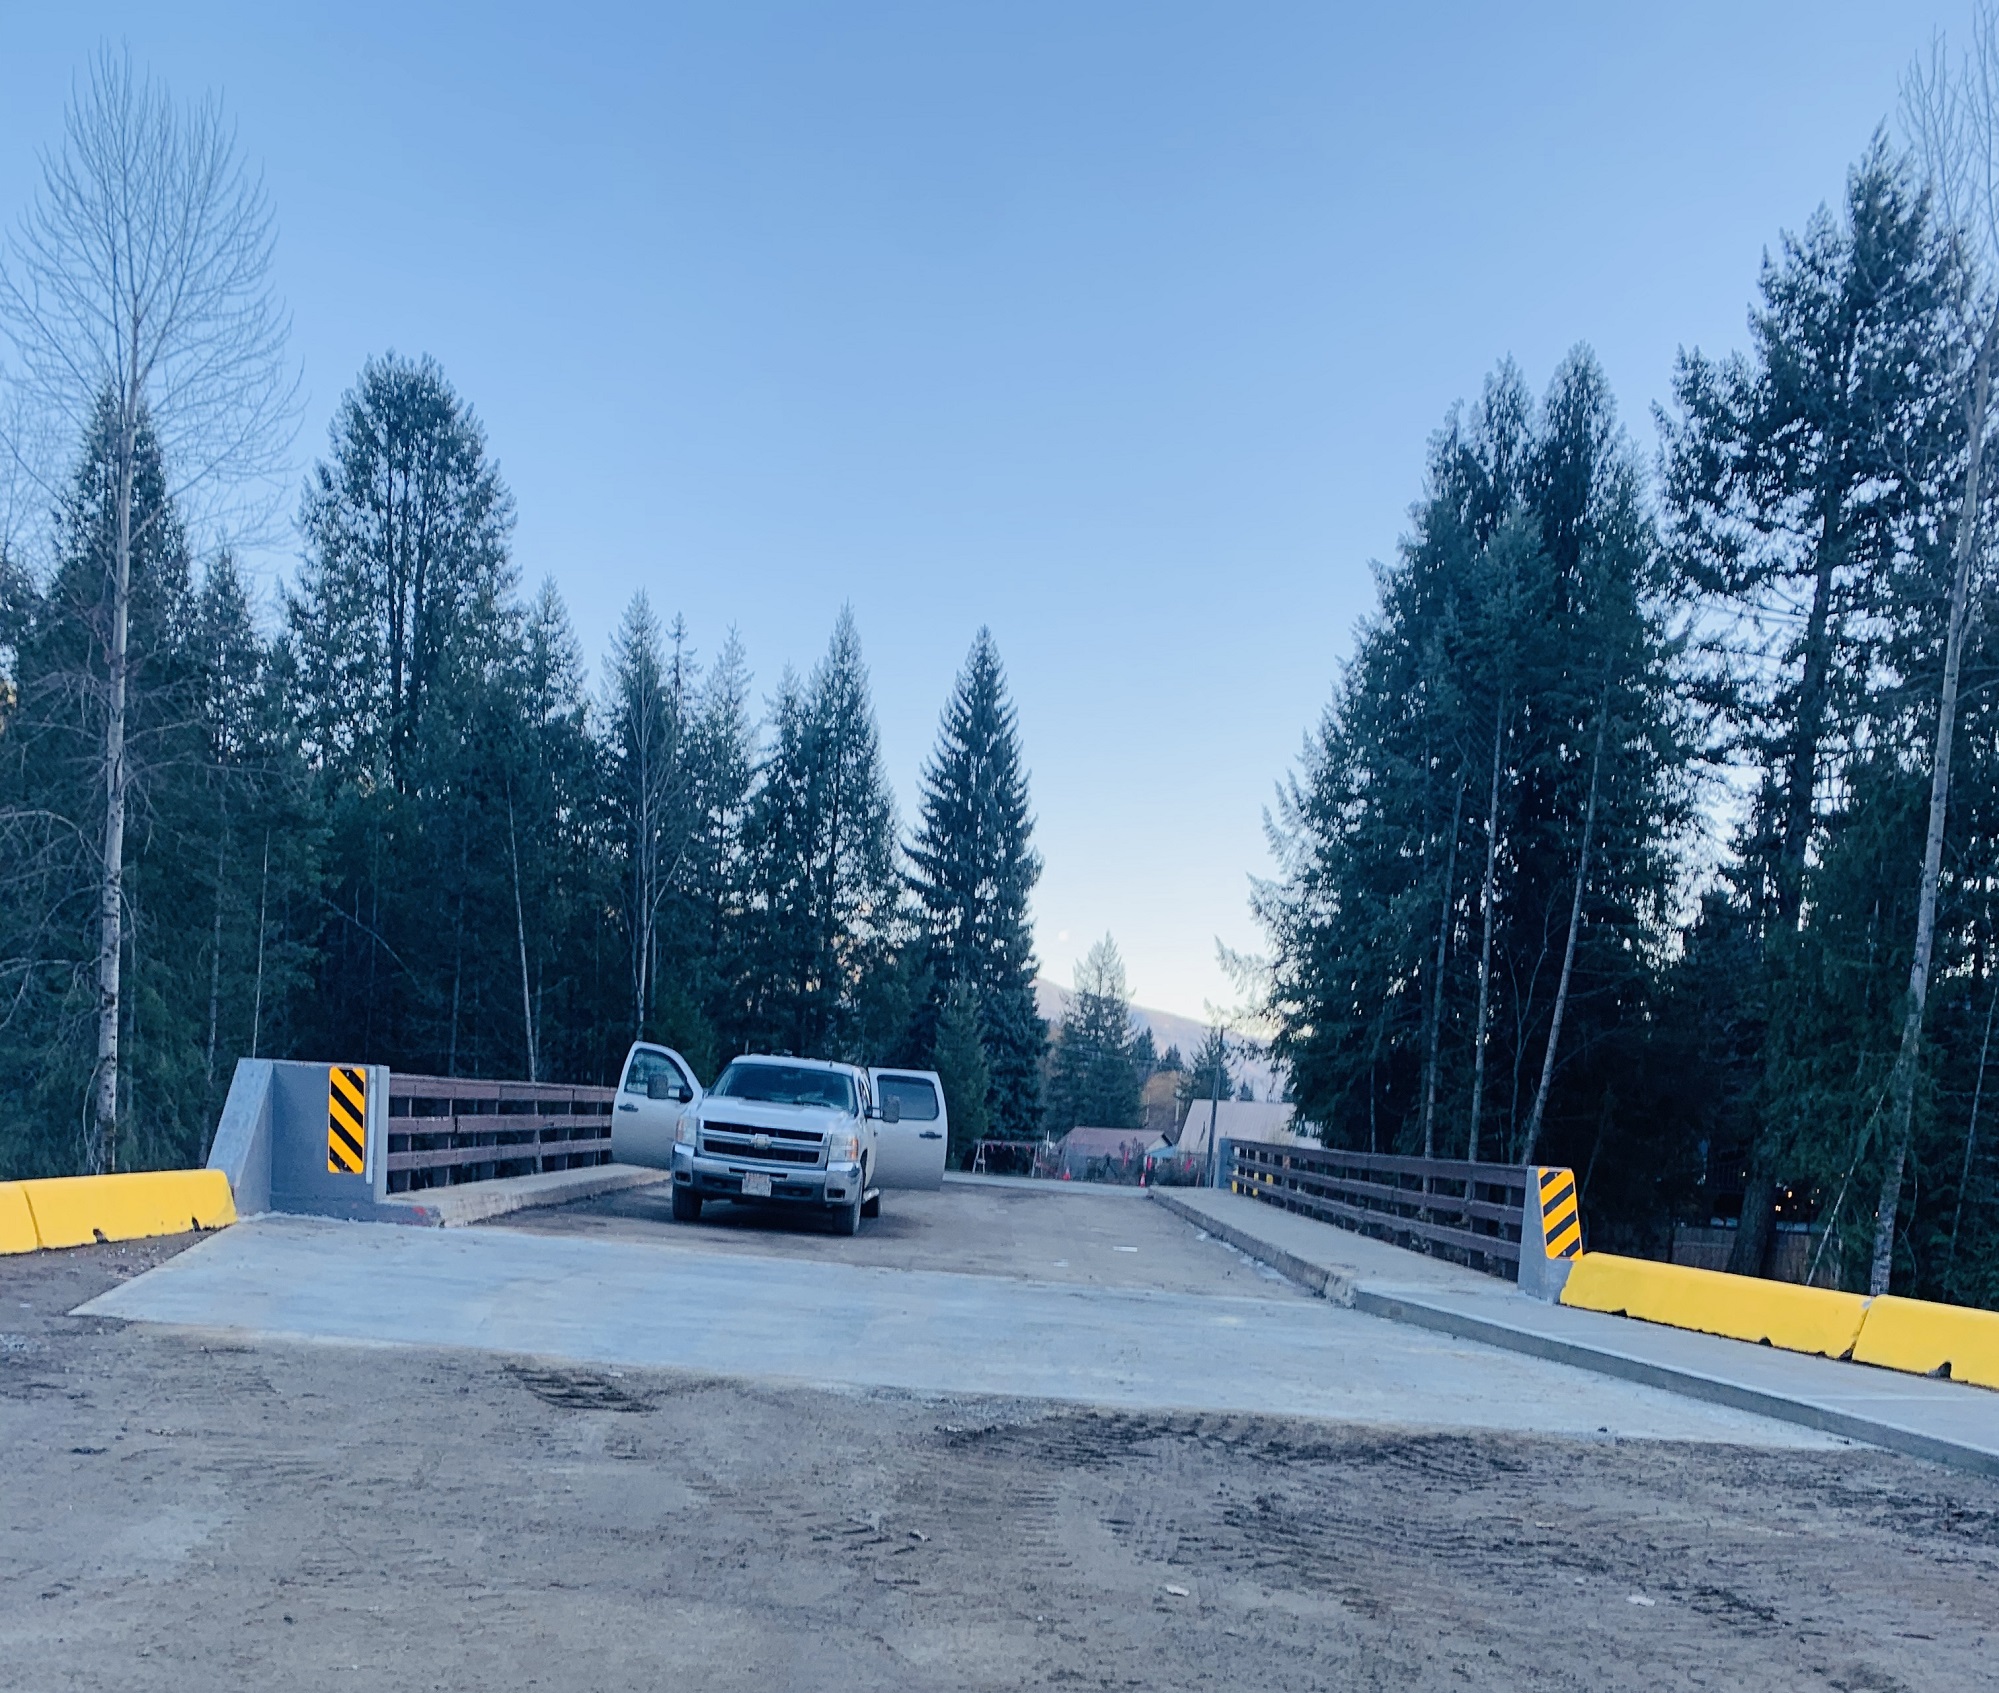 Village of Salmo celebrates completion of first phase of bridge repairs